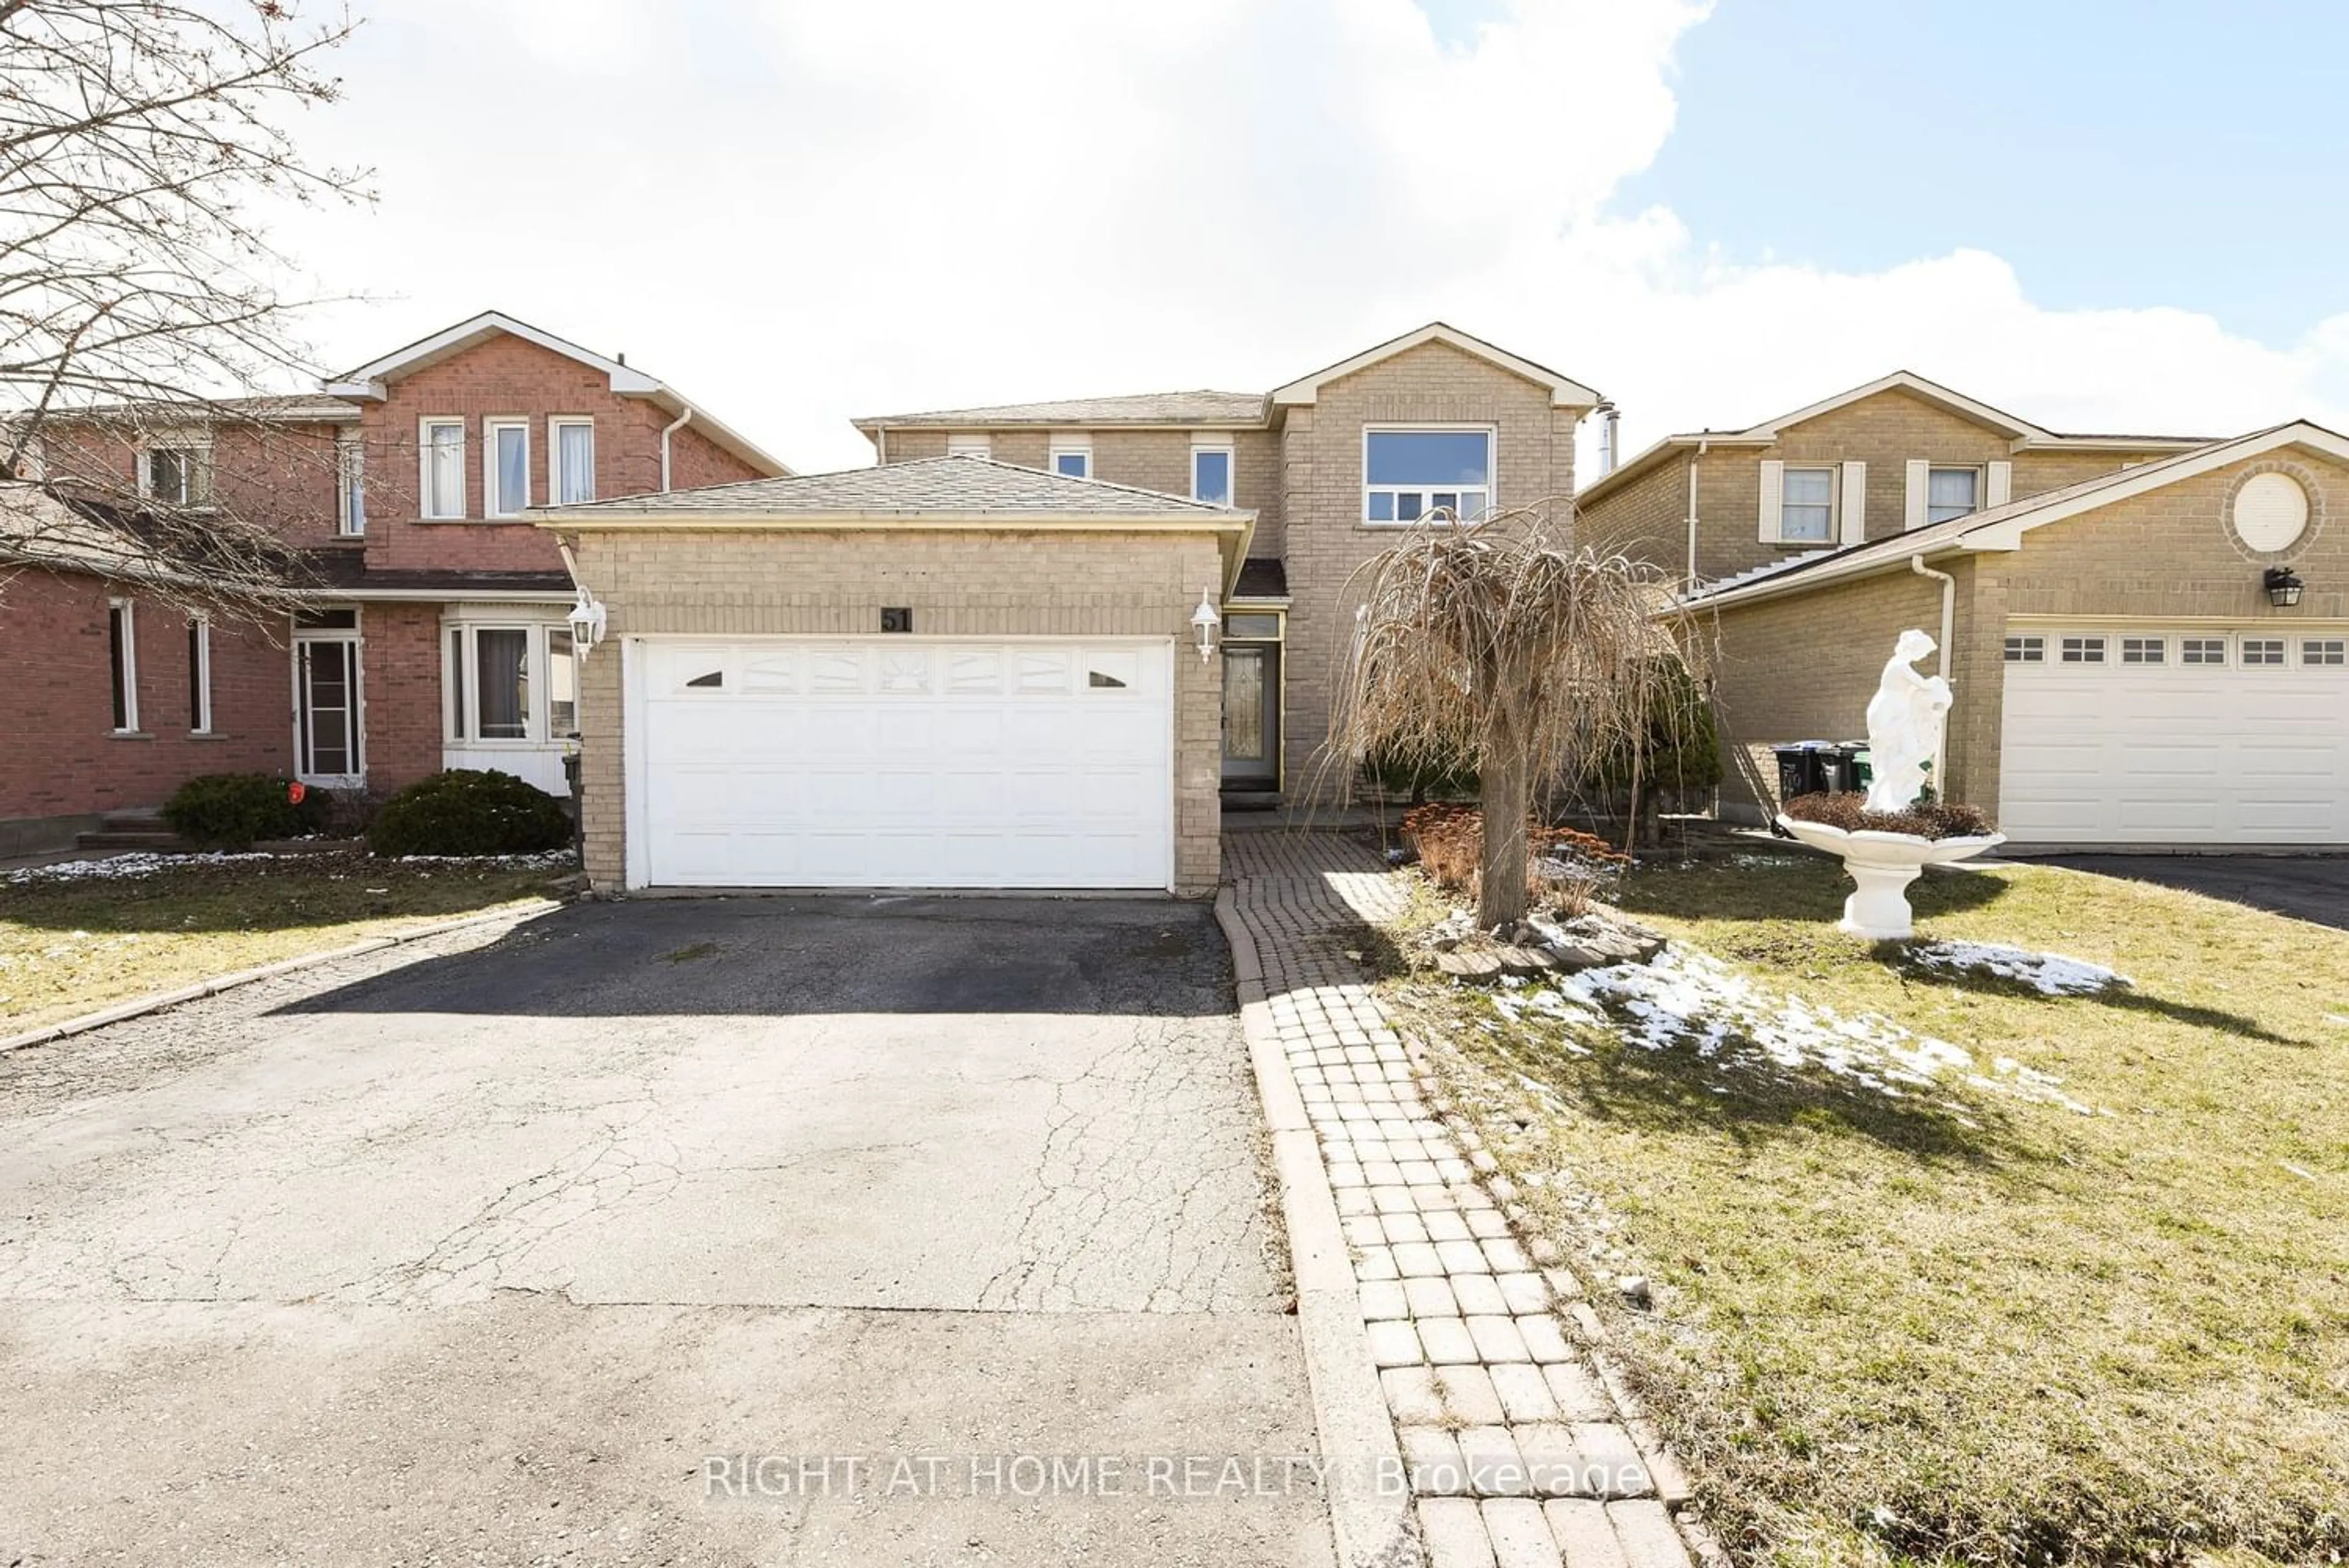 Frontside or backside of a home for 51 Cherrytree Dr, Brampton Ontario L6Y 3P6